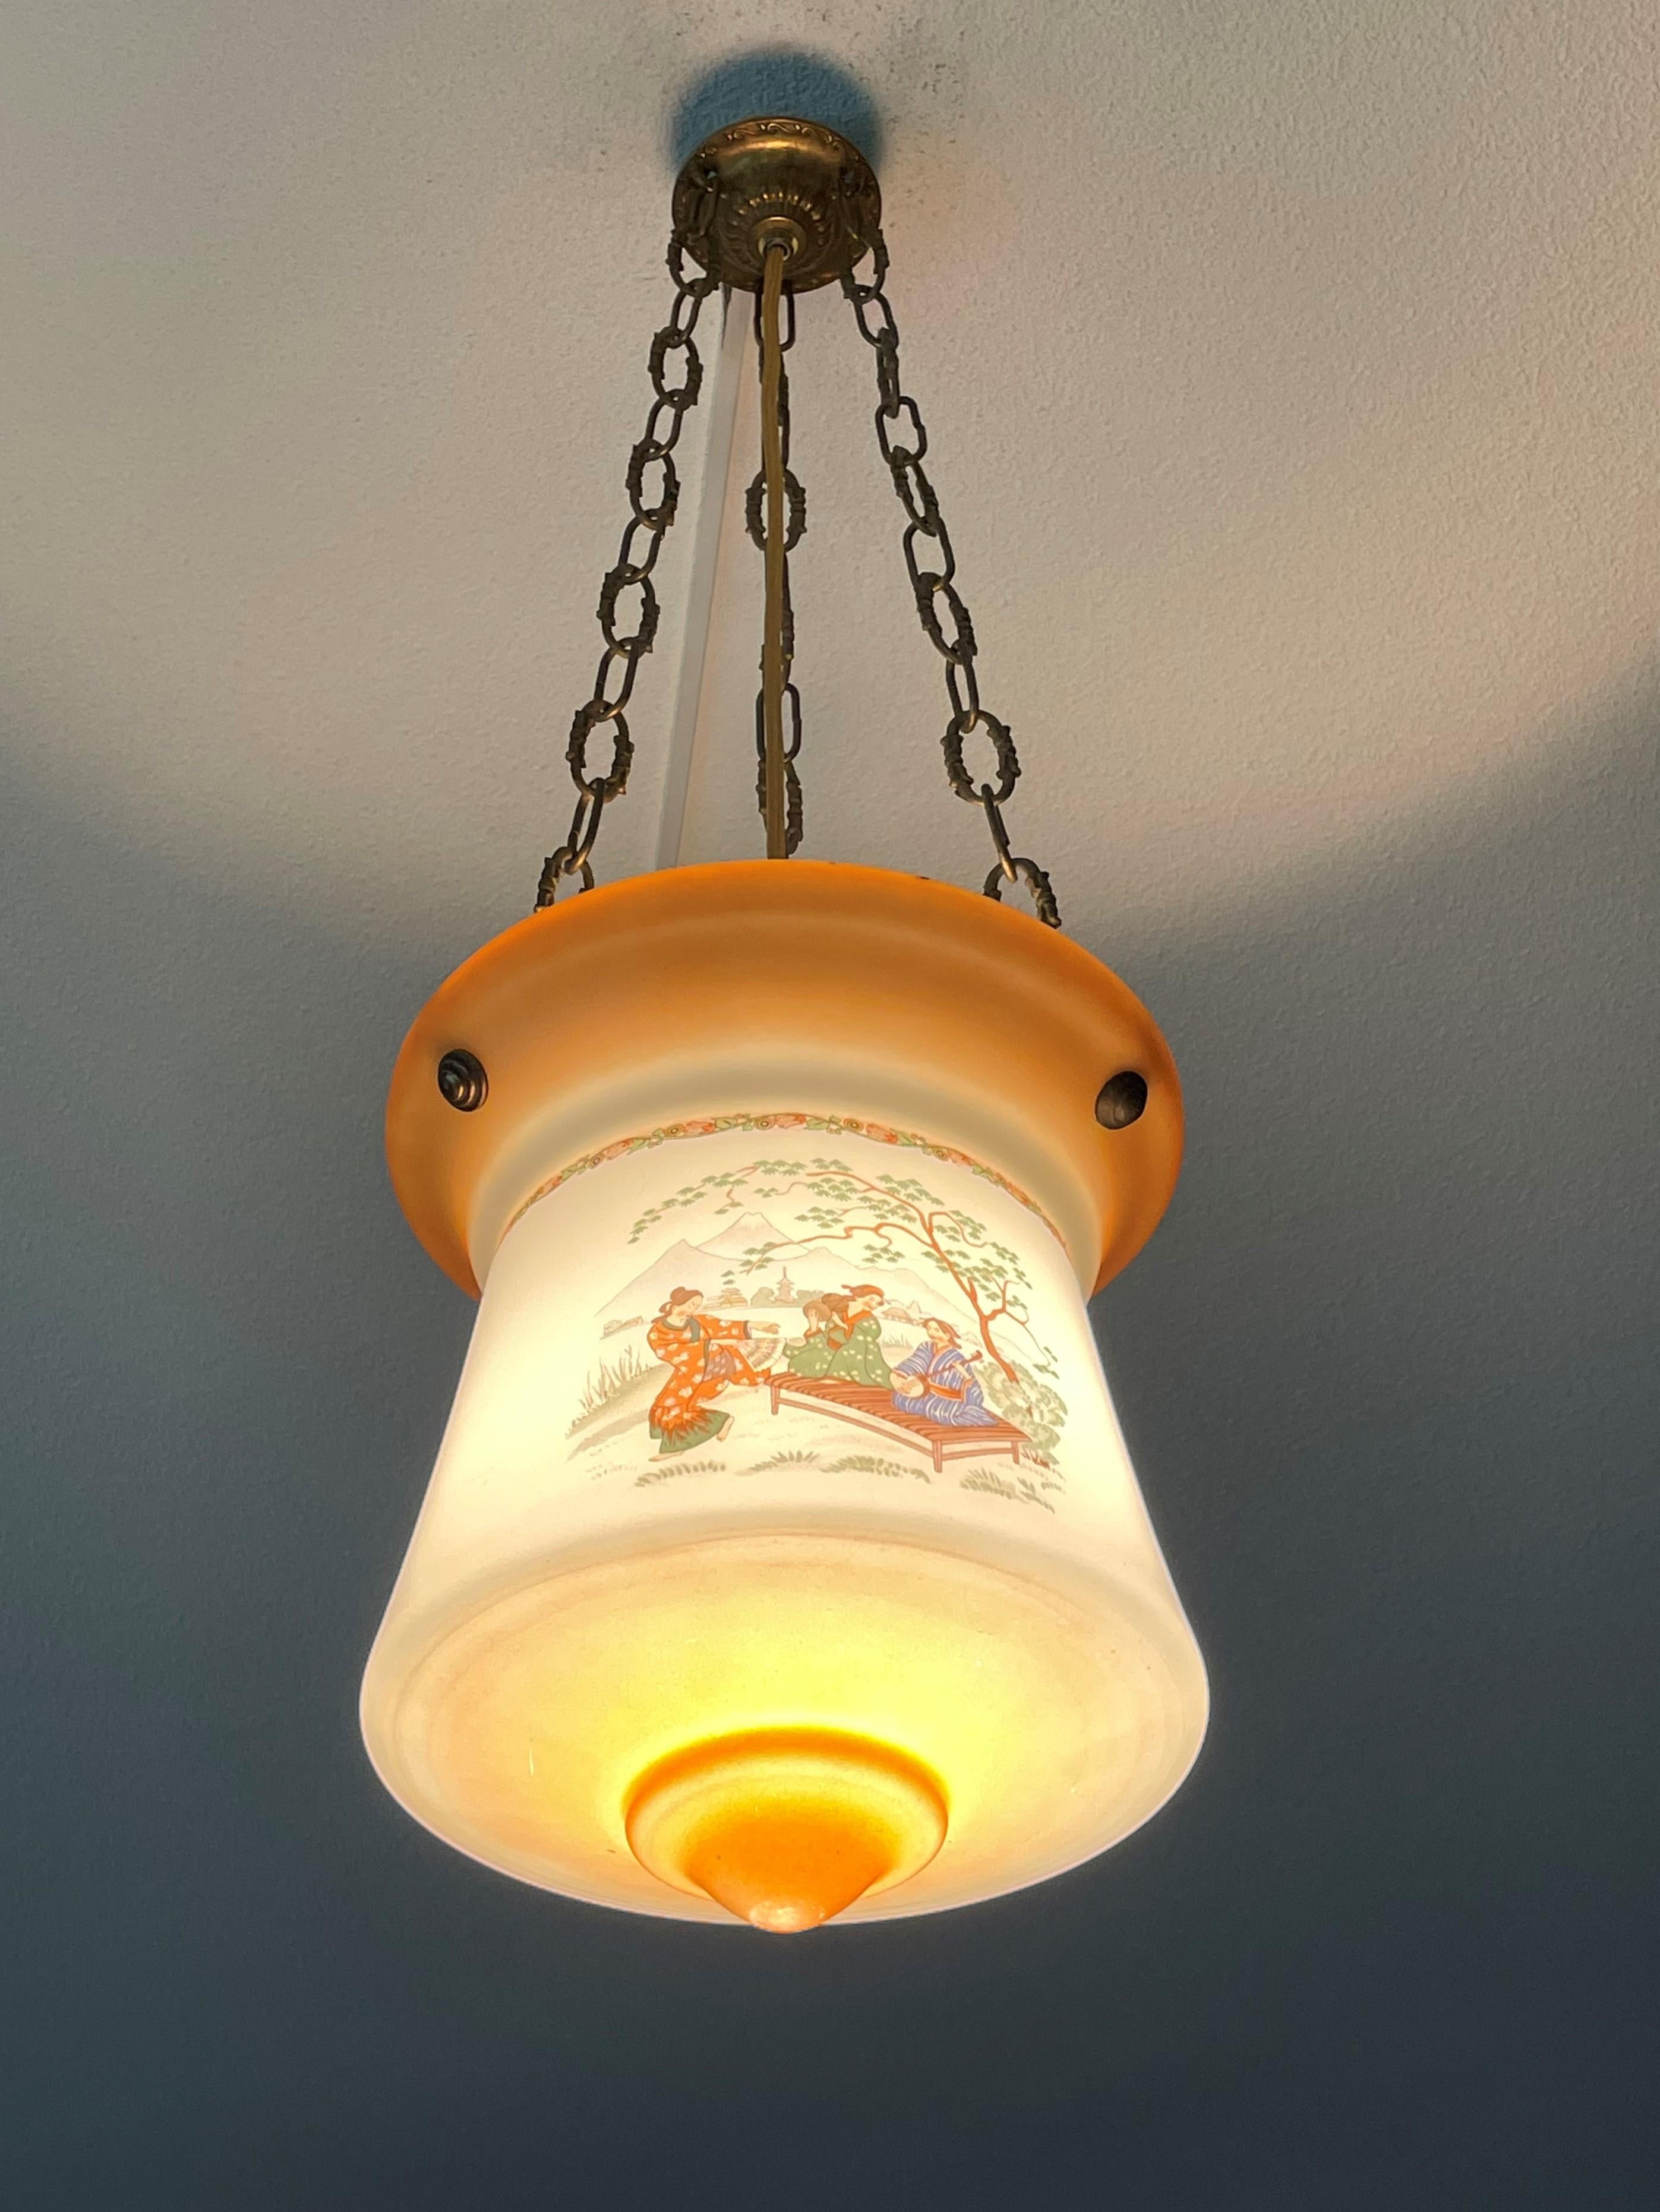 Art Deco Japonisme Lantern Pendant W. Mount Fuji and Traditional Music Graphics For Sale 9